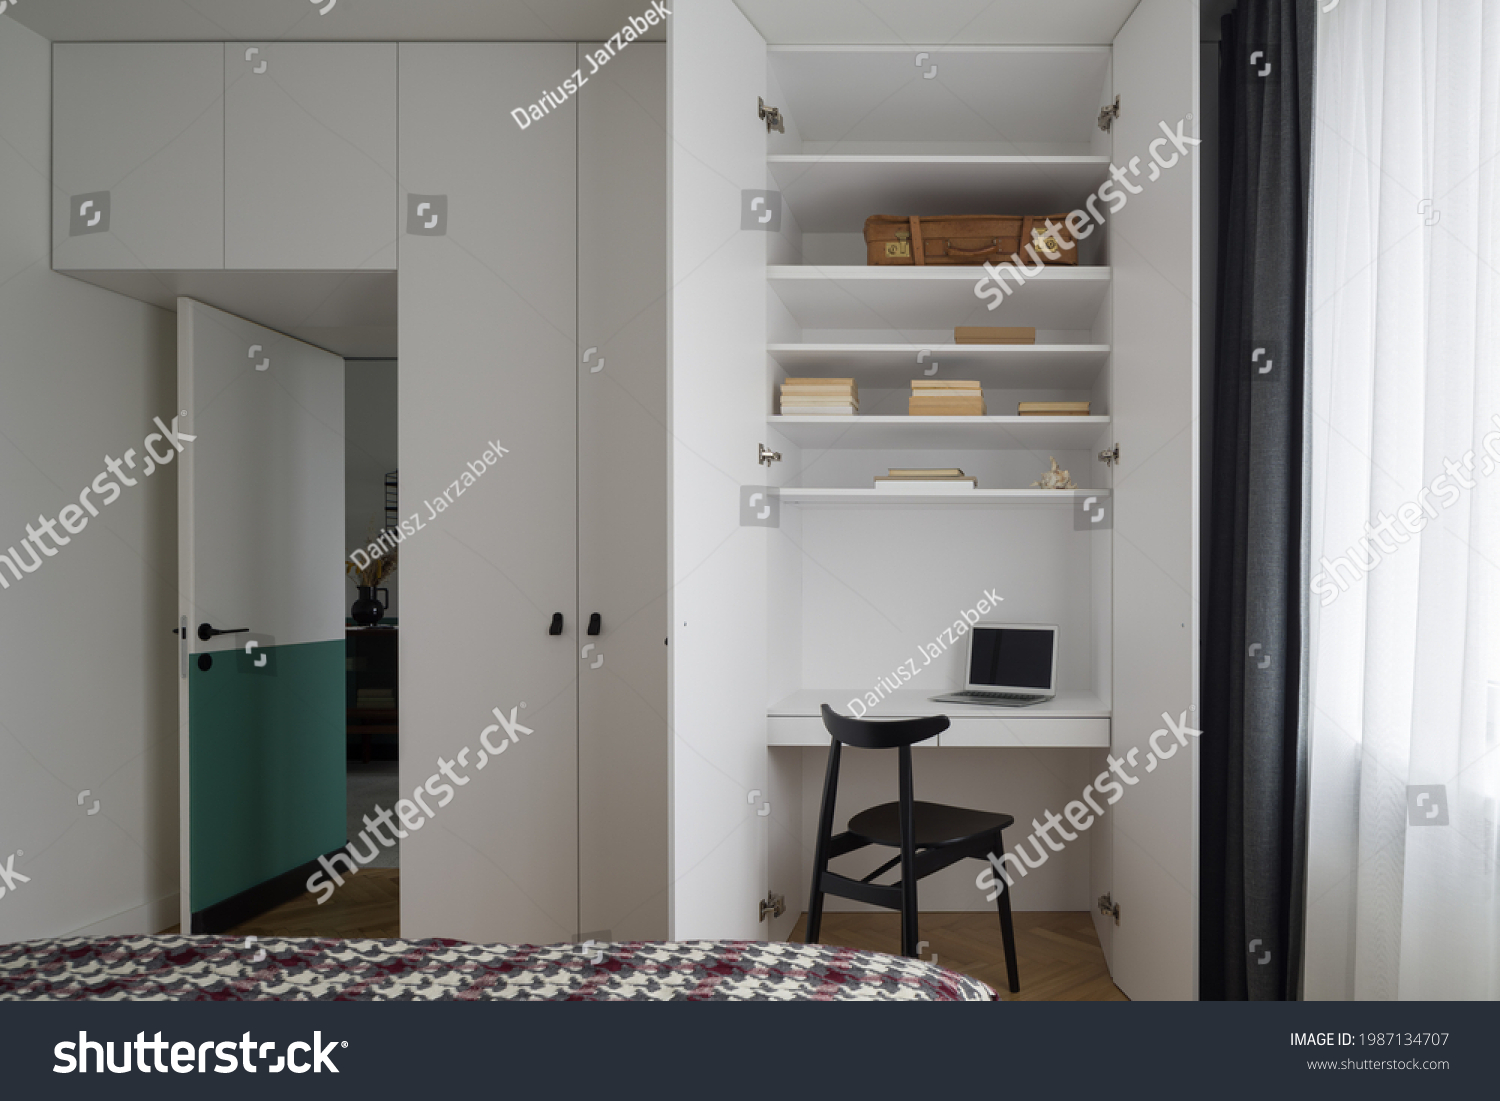 Functional idea with small desk to work in white wardrobe in spacious bedroom #1987134707